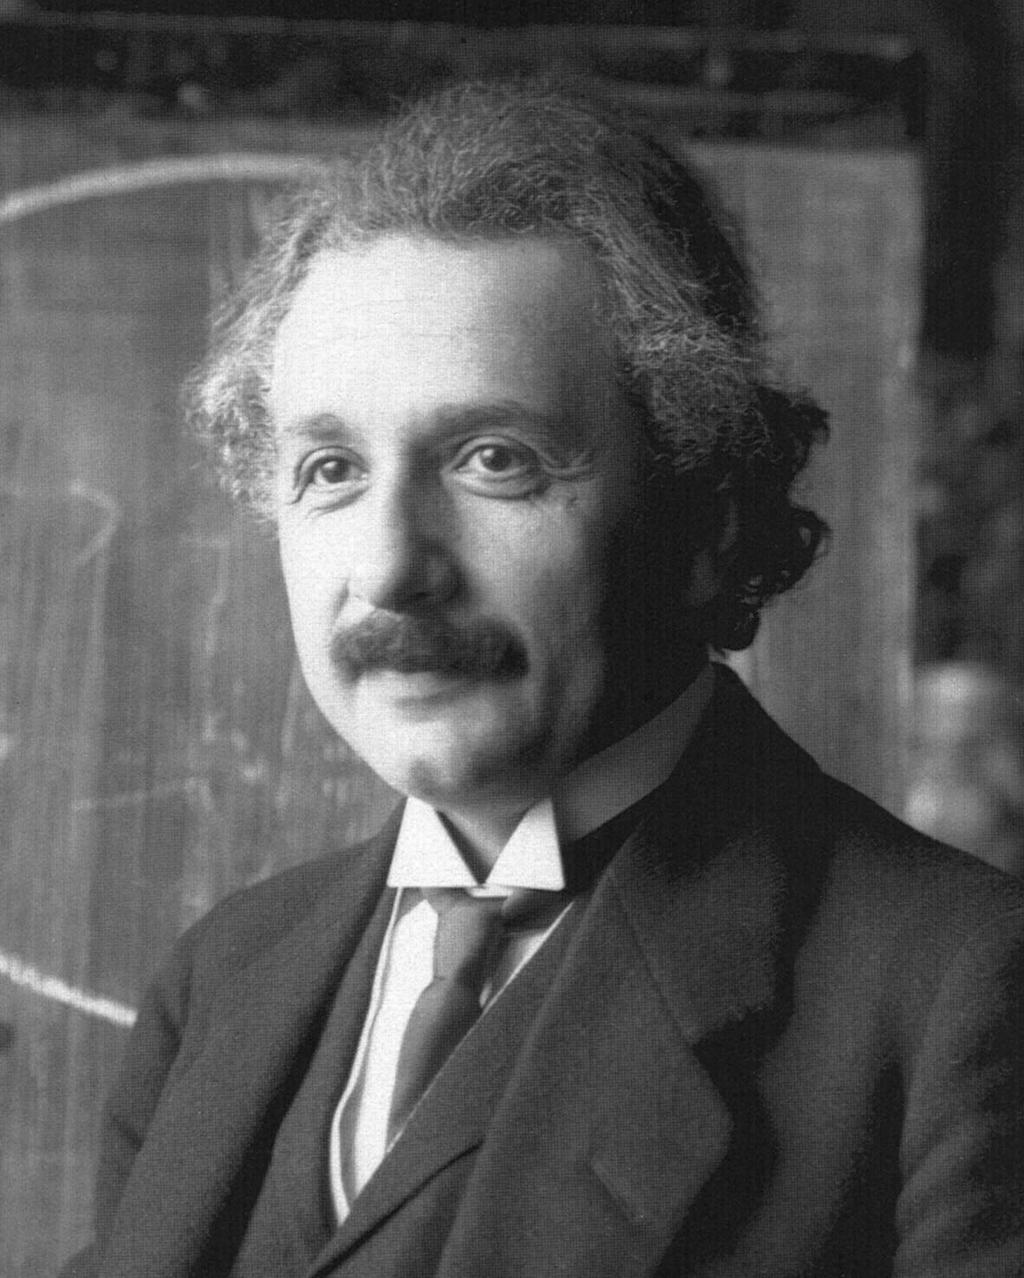 Einstein s Theory Einstein suggested that the electromagnetic radiation field is quantized into particles called photons Each photon has the energy quantum Ephoton = h ν = Albert Einstein (1879-1955)